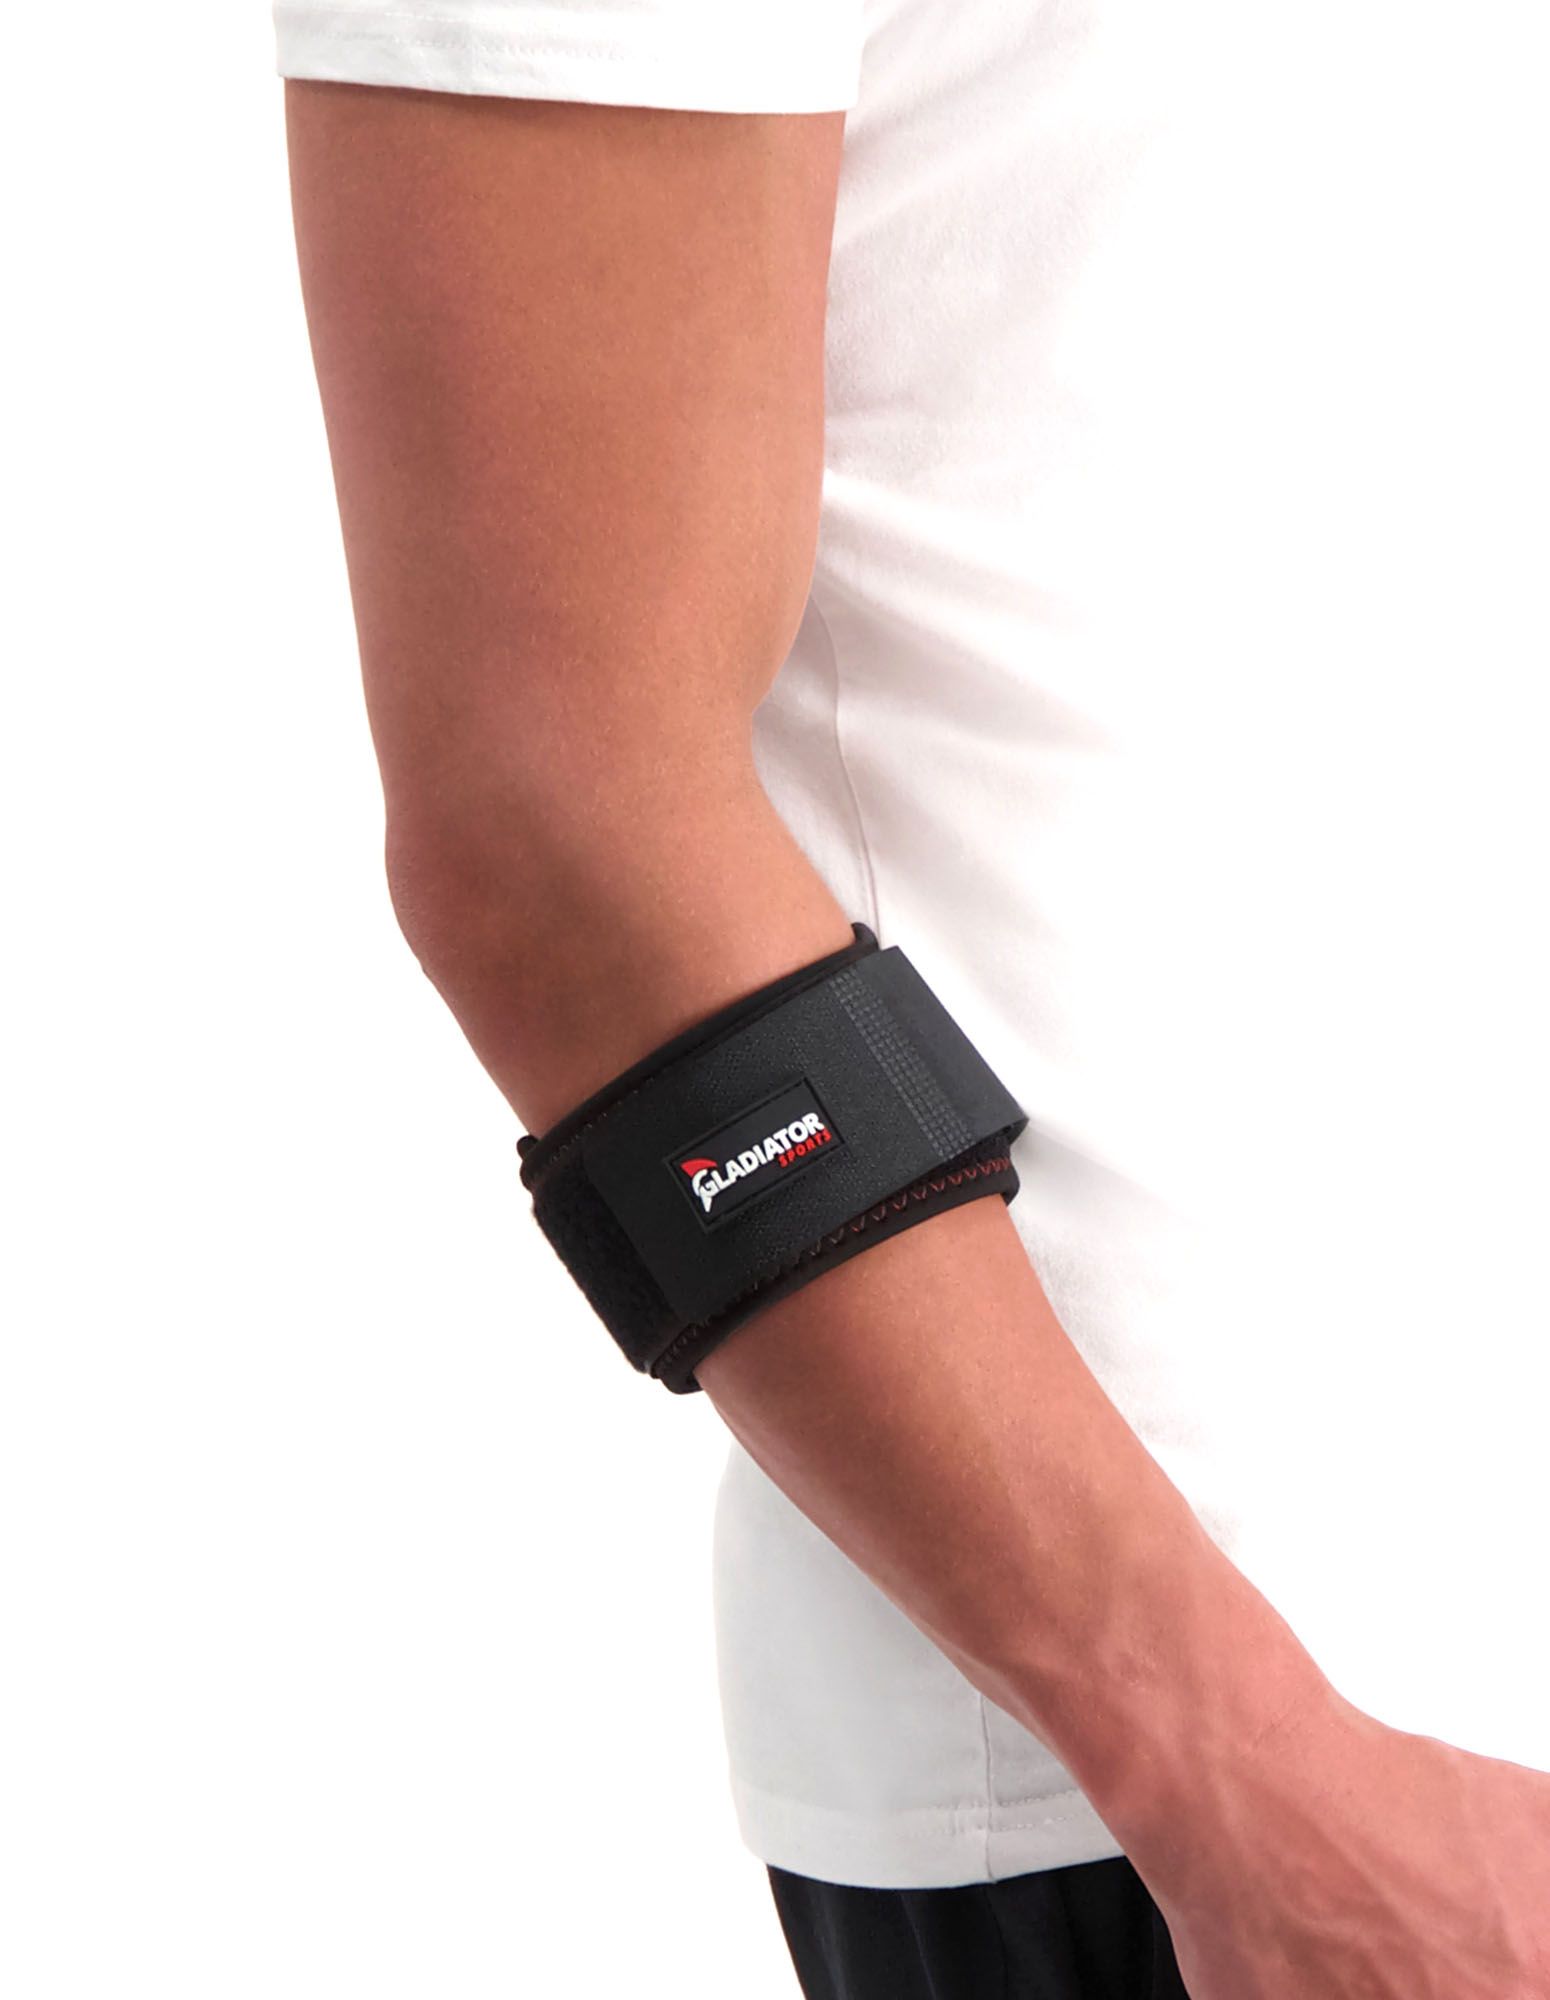 gladiator sports tennis elbow strap for sale